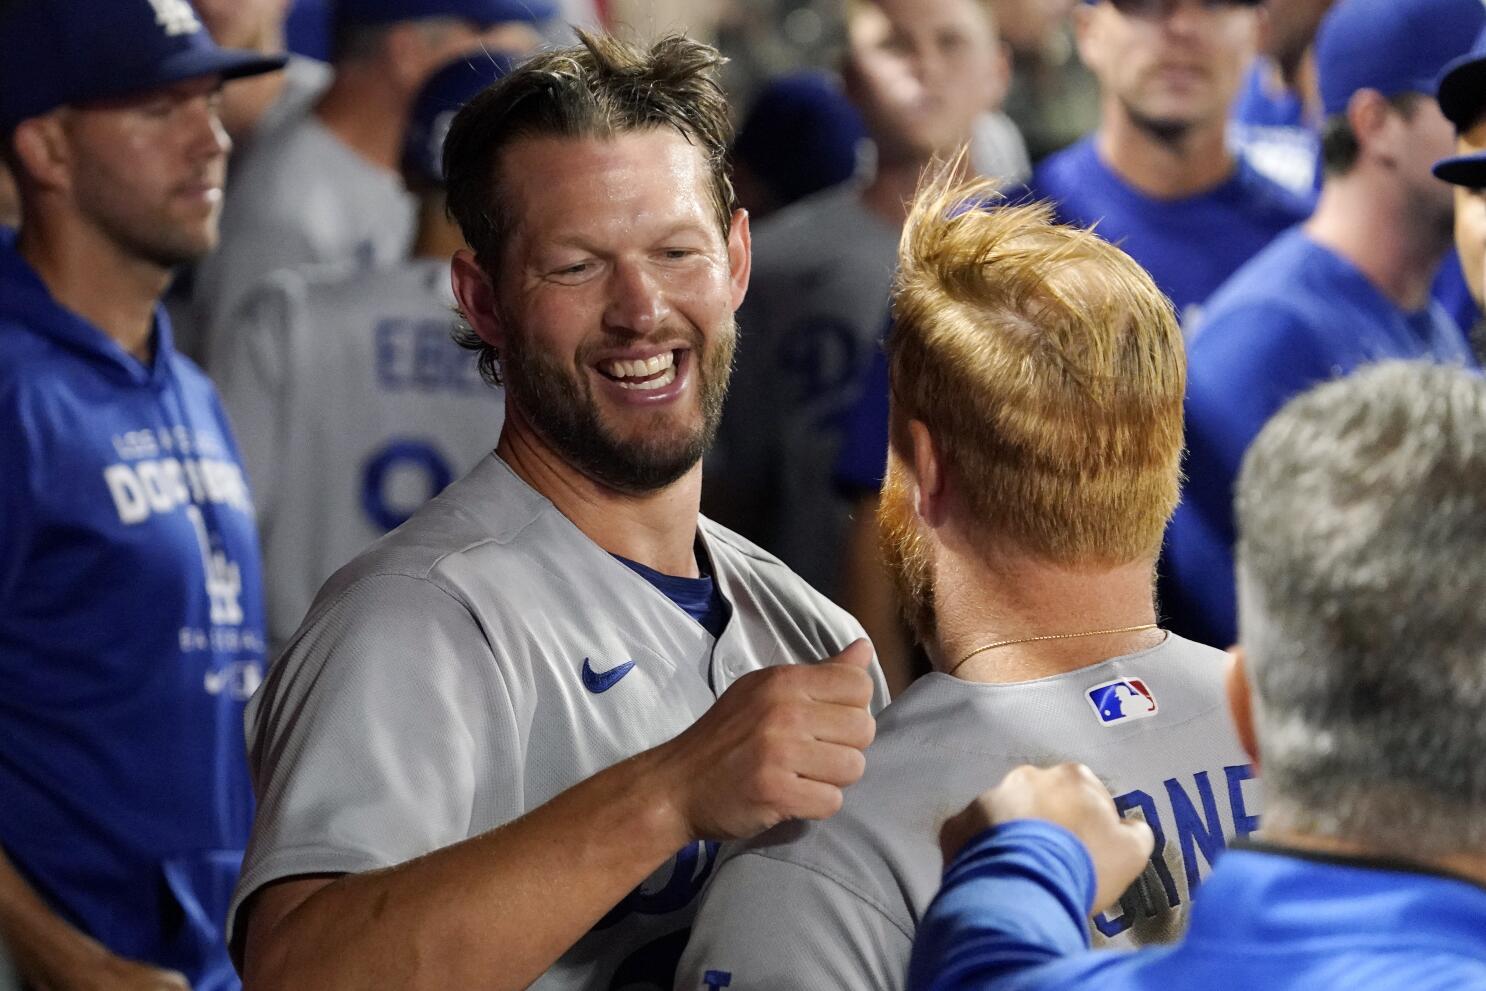 How 10-time All-Star Clayton Kershaw continues to set an example